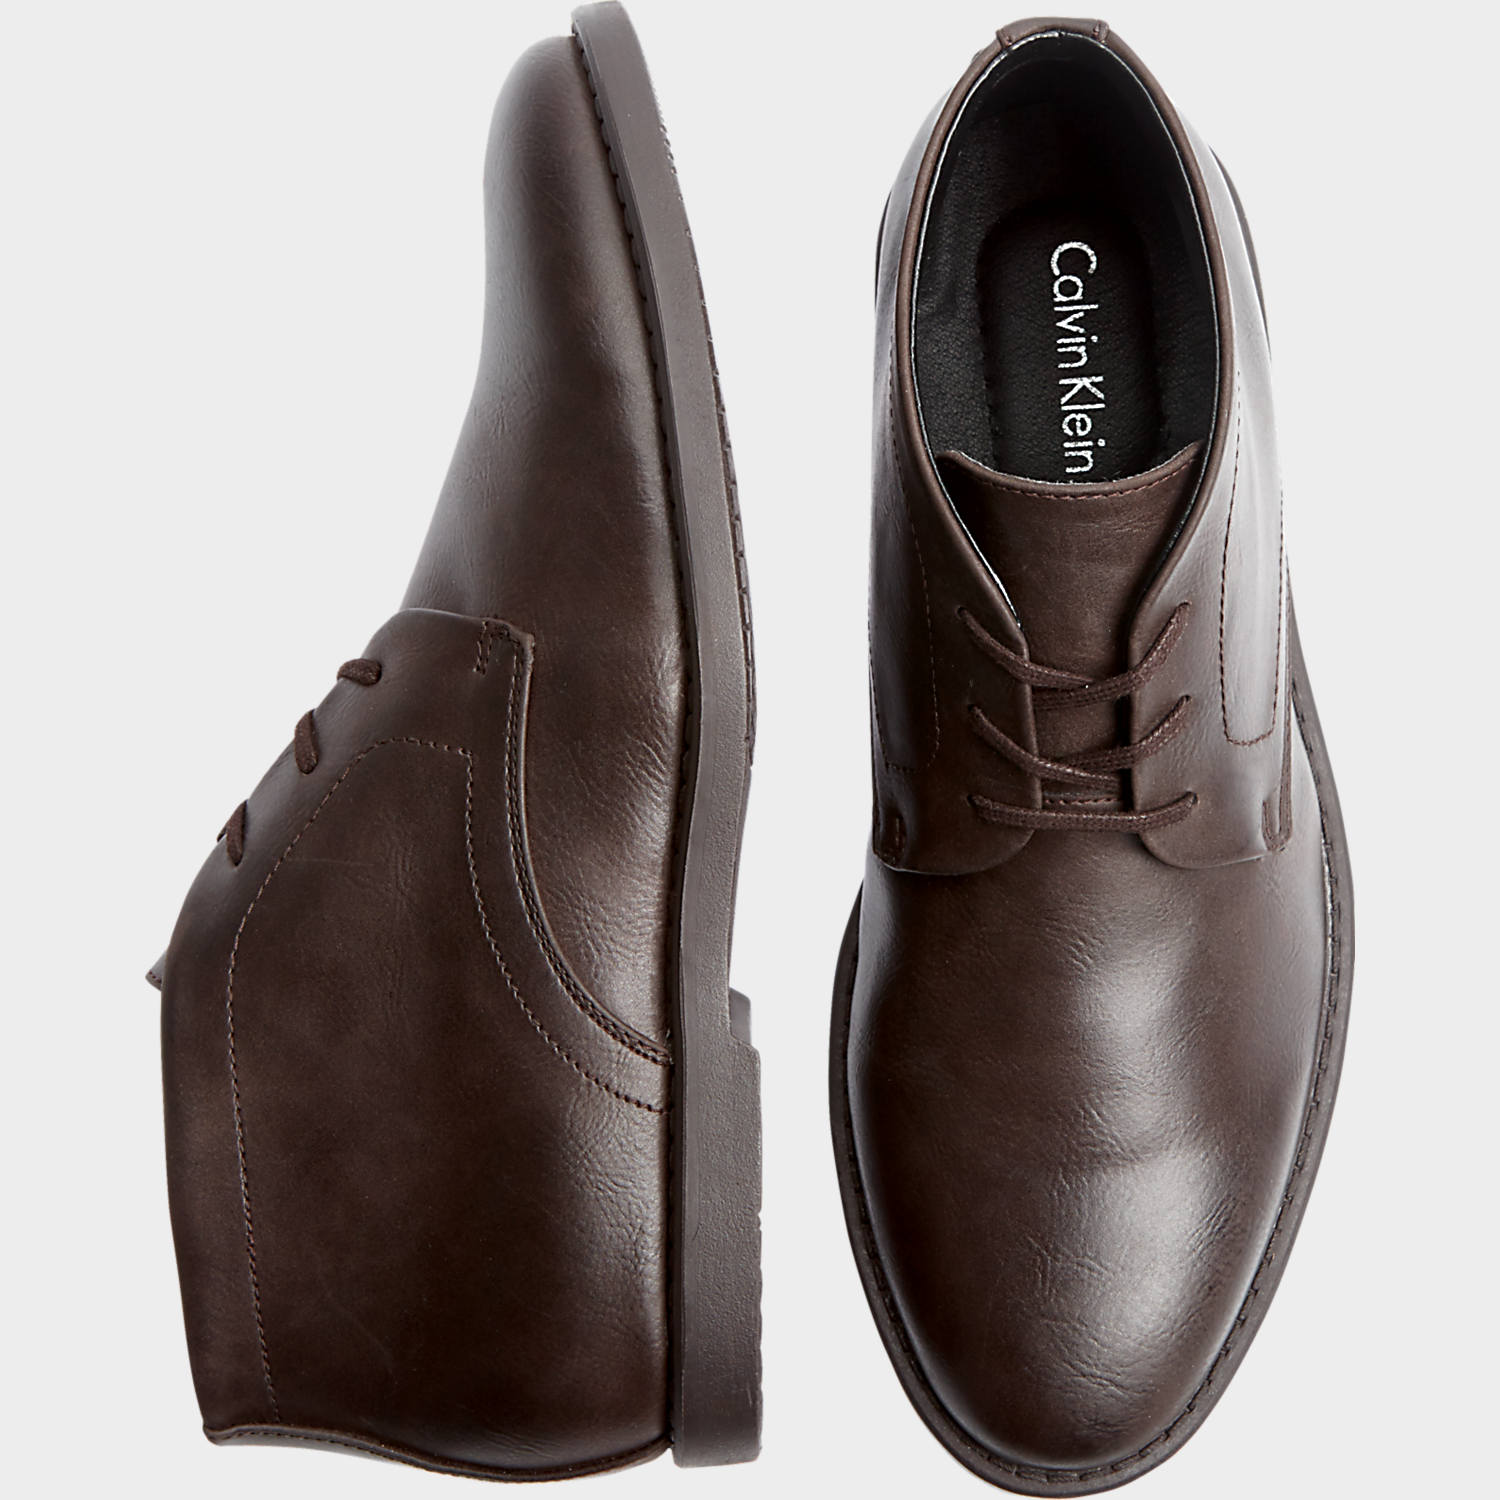 Calvin Klein Brown Leather Ankle Boots - Men's Boots | Men's Wearhouse